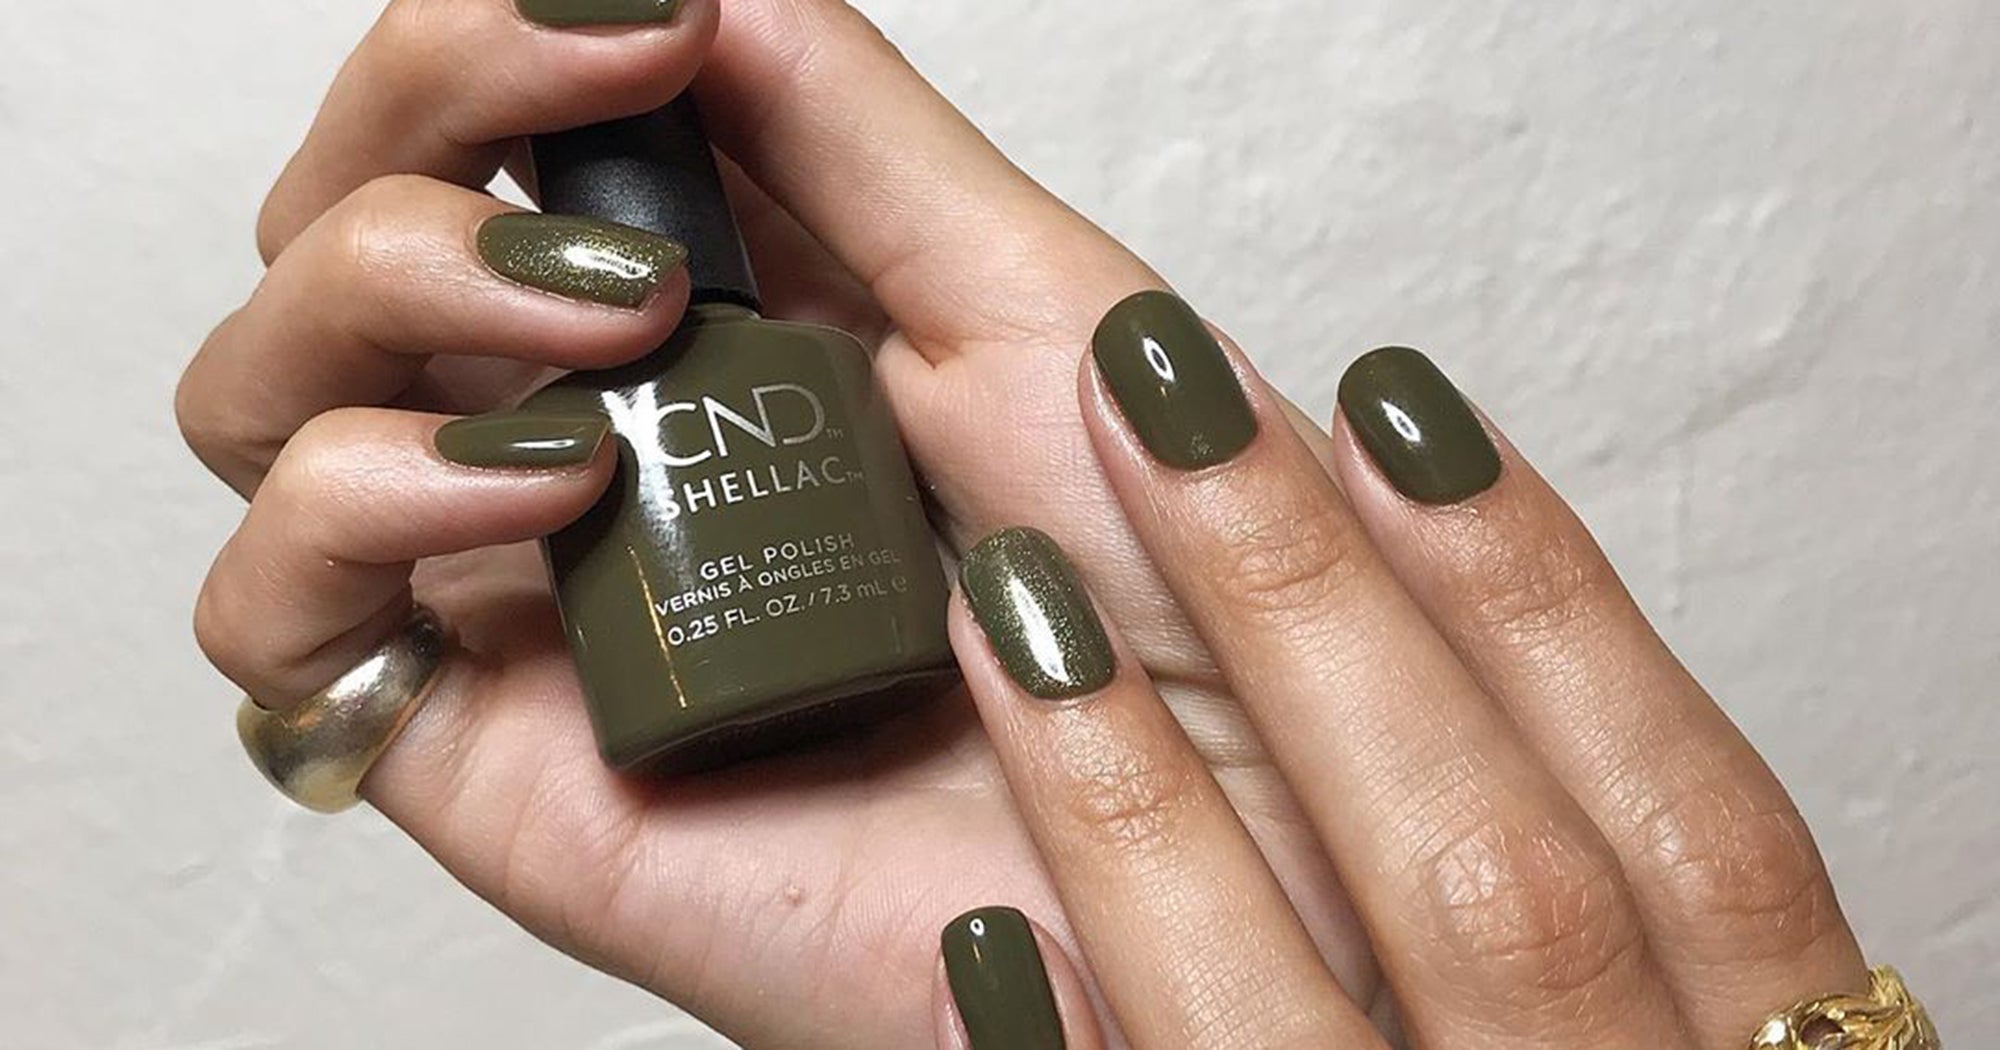 2. "Olive green nail color for dark skin" - wide 6